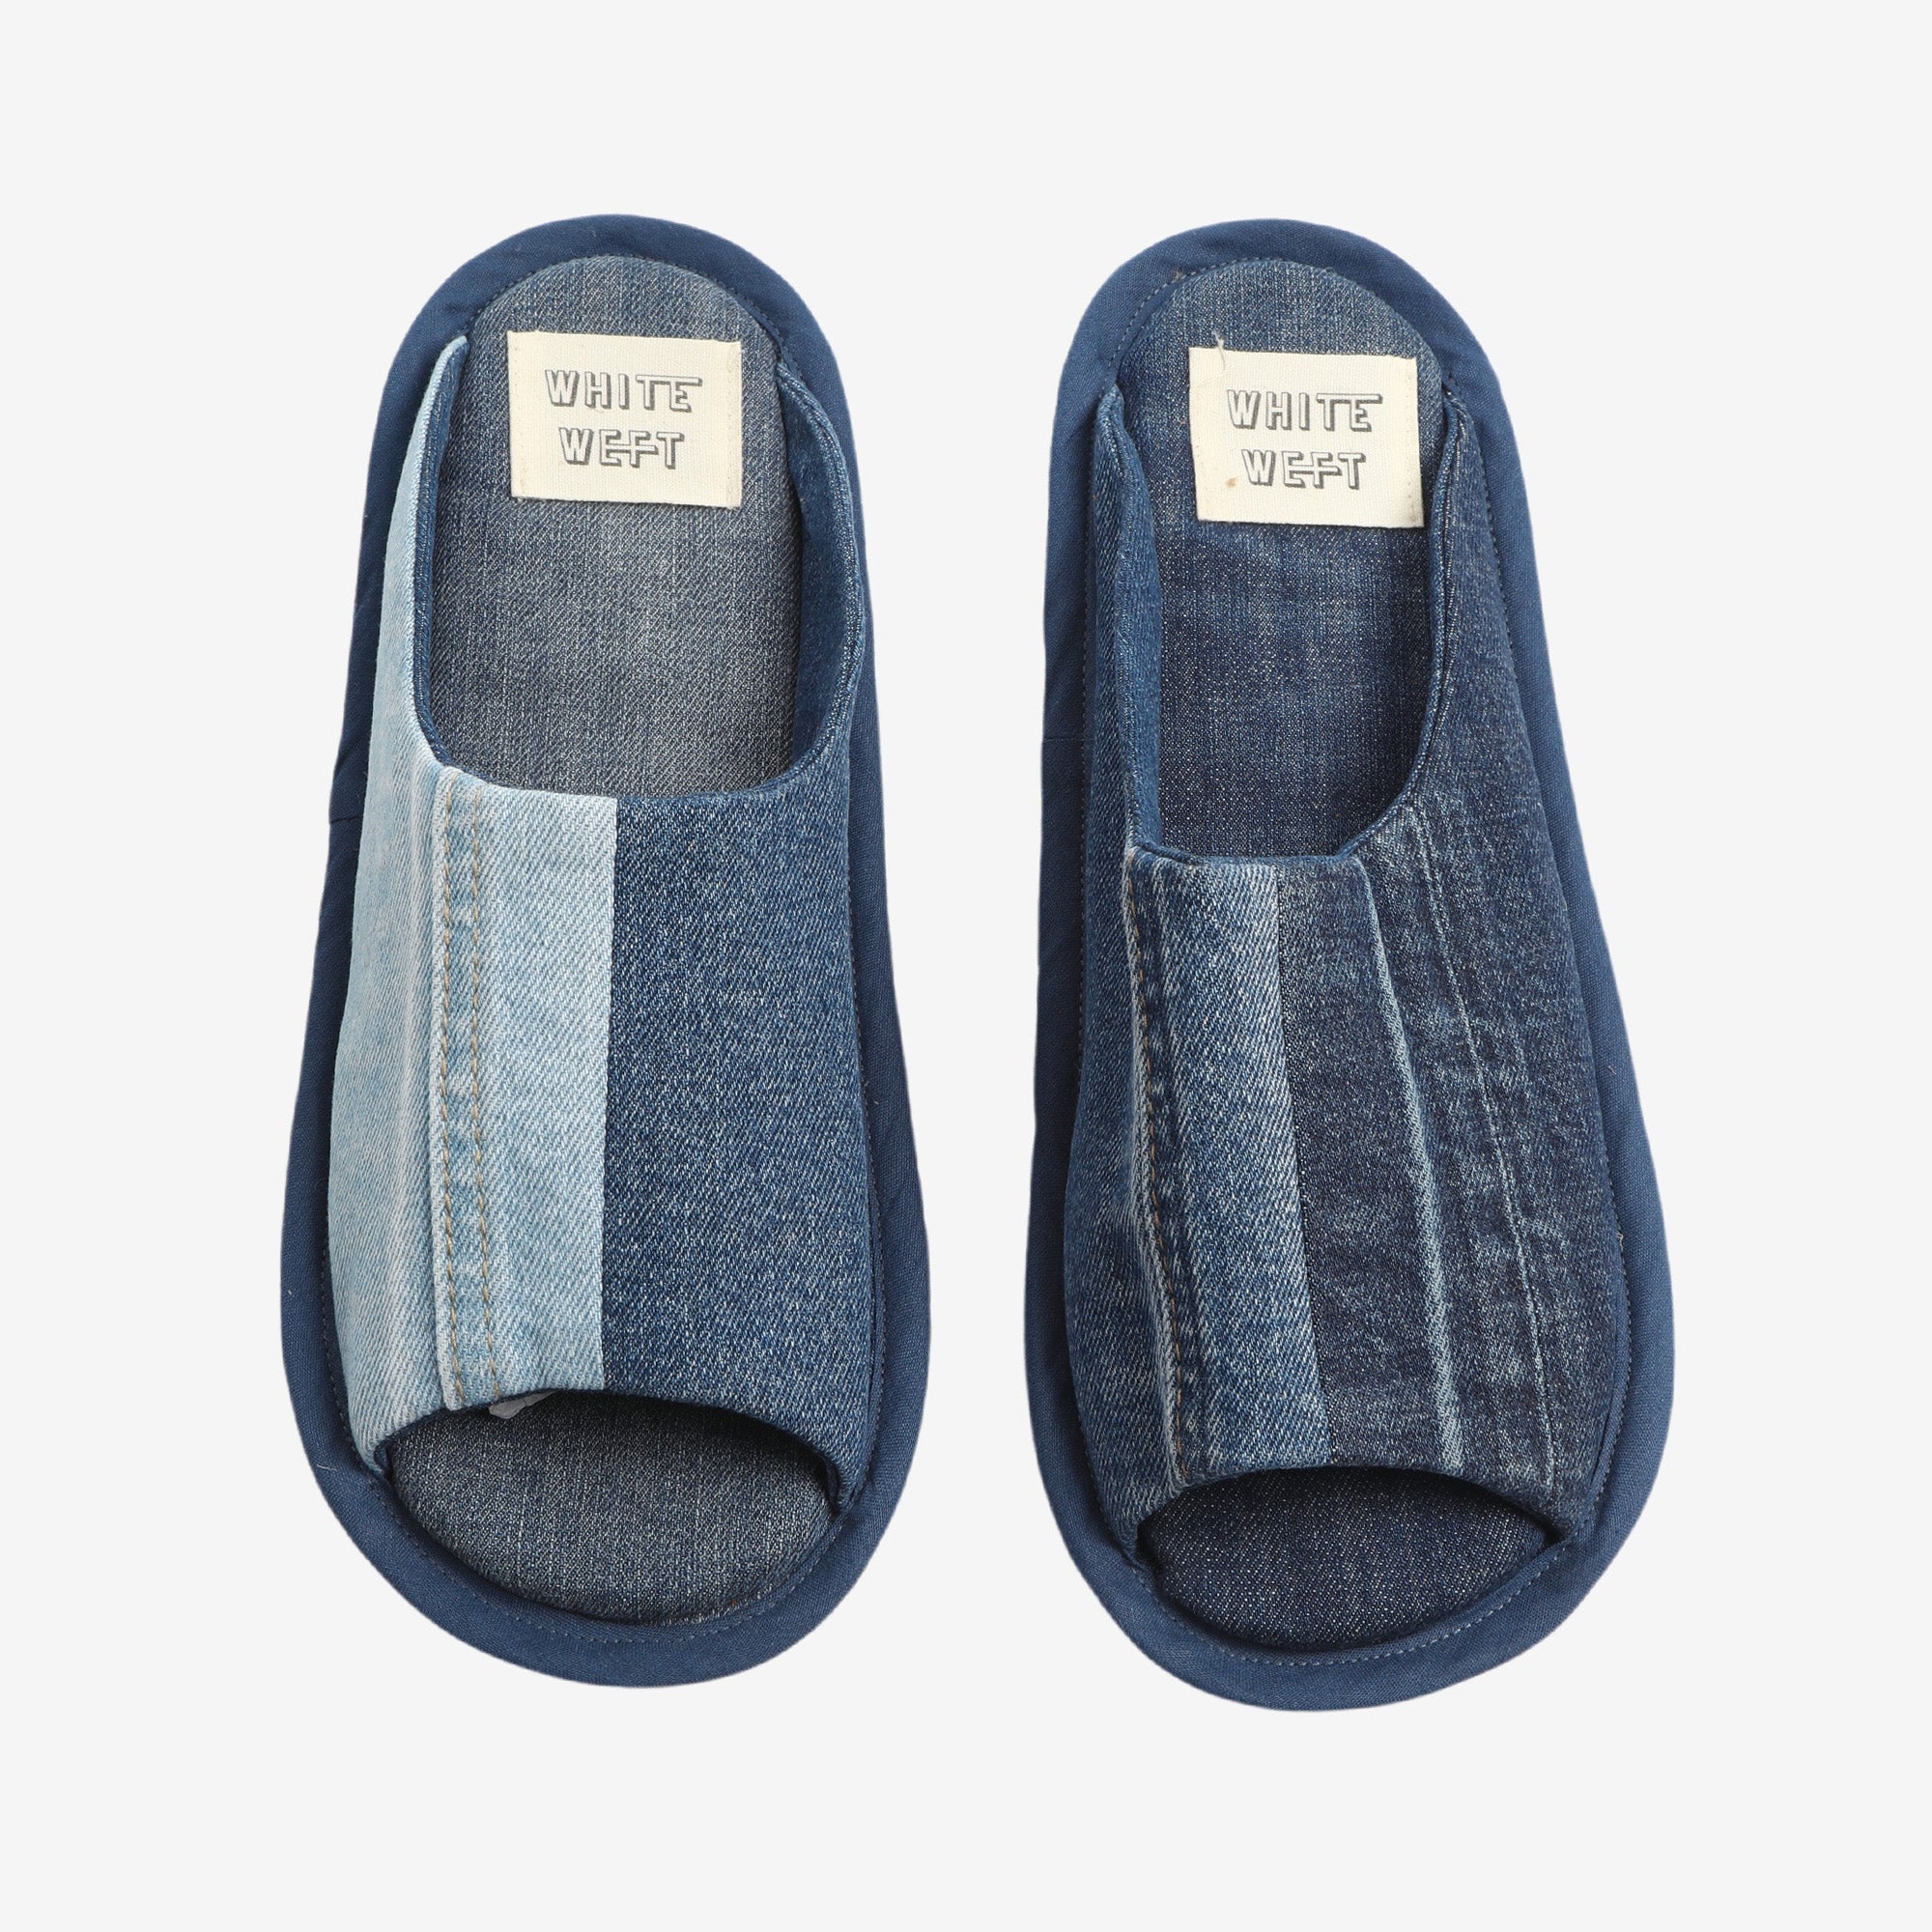 Up-cycled Denim Cut Off Slippers